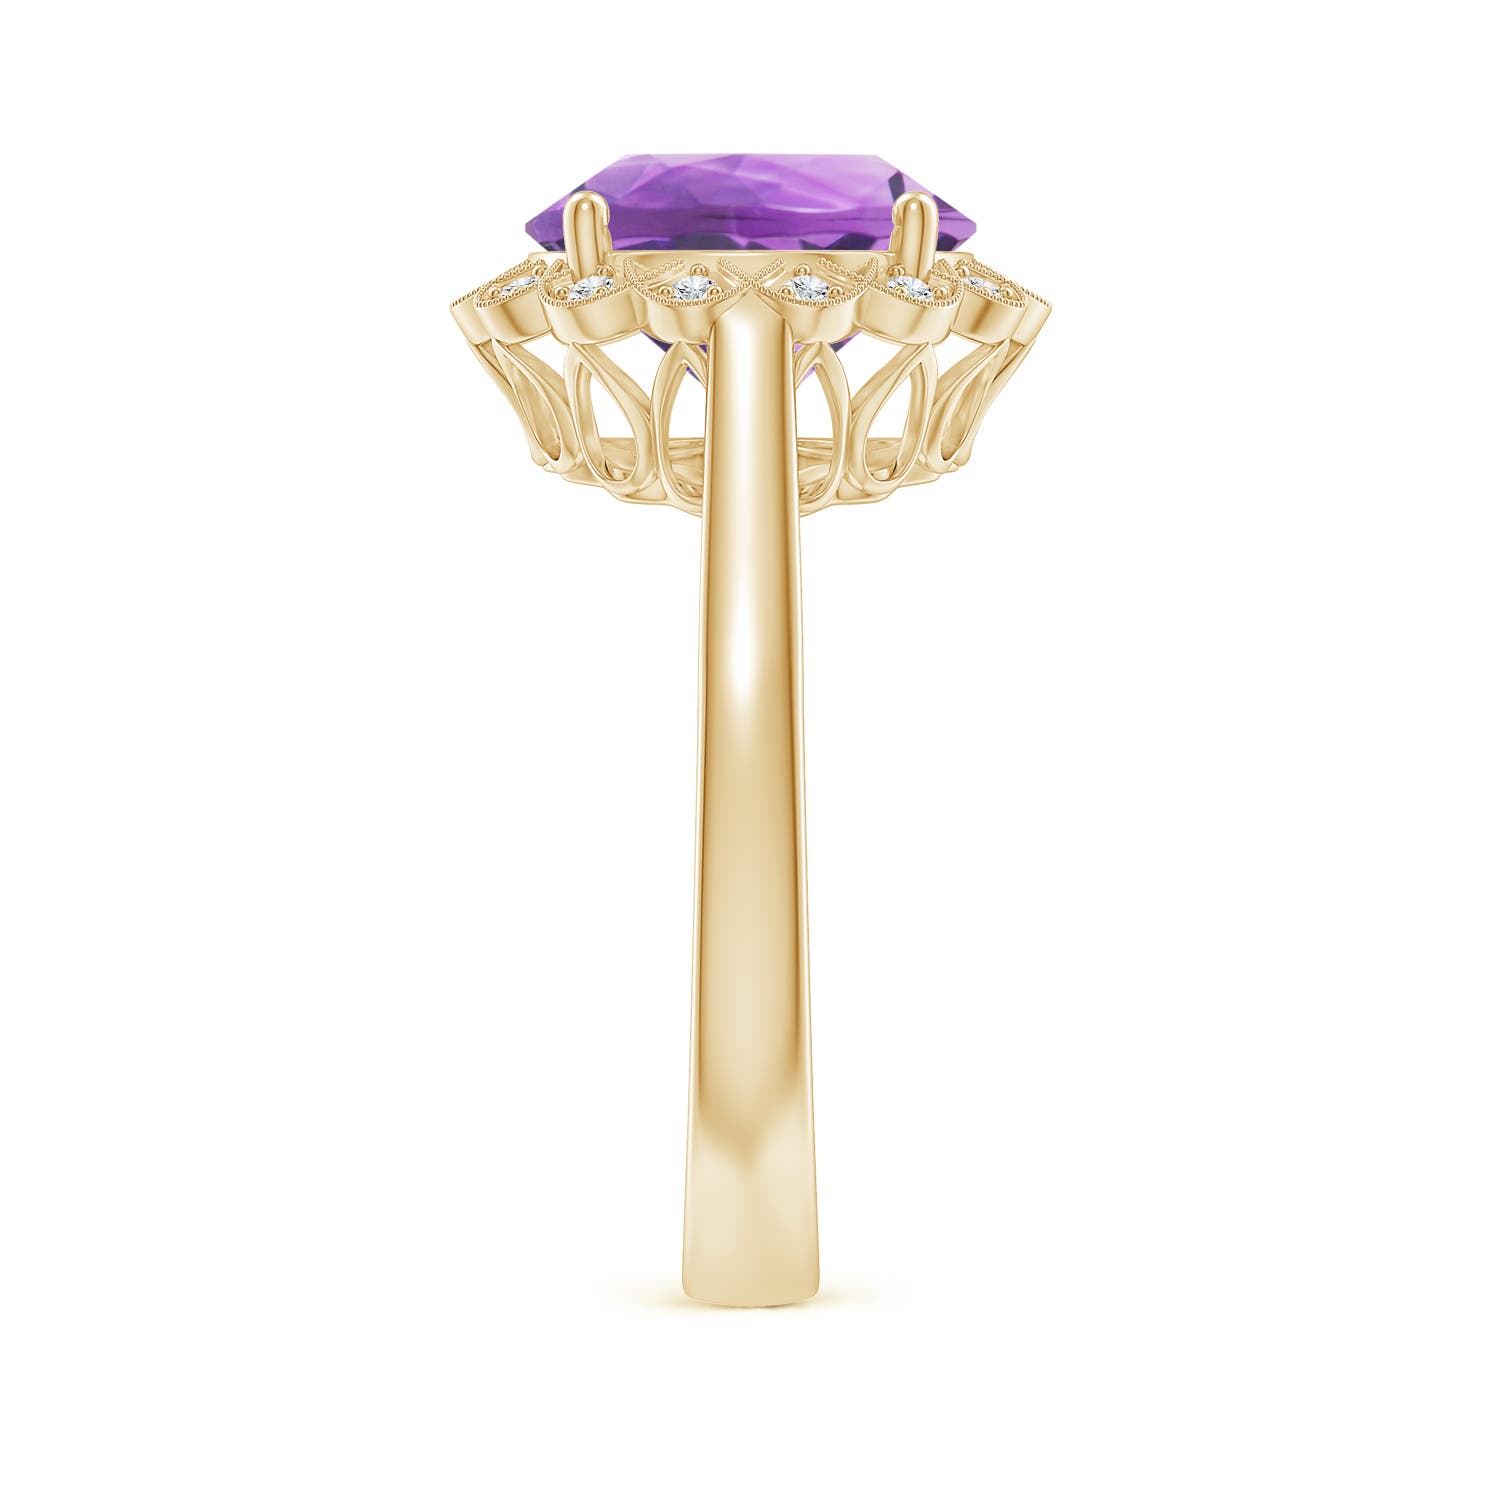 A- Amethyst / 3.28 CT / 14 KT Yellow Gold